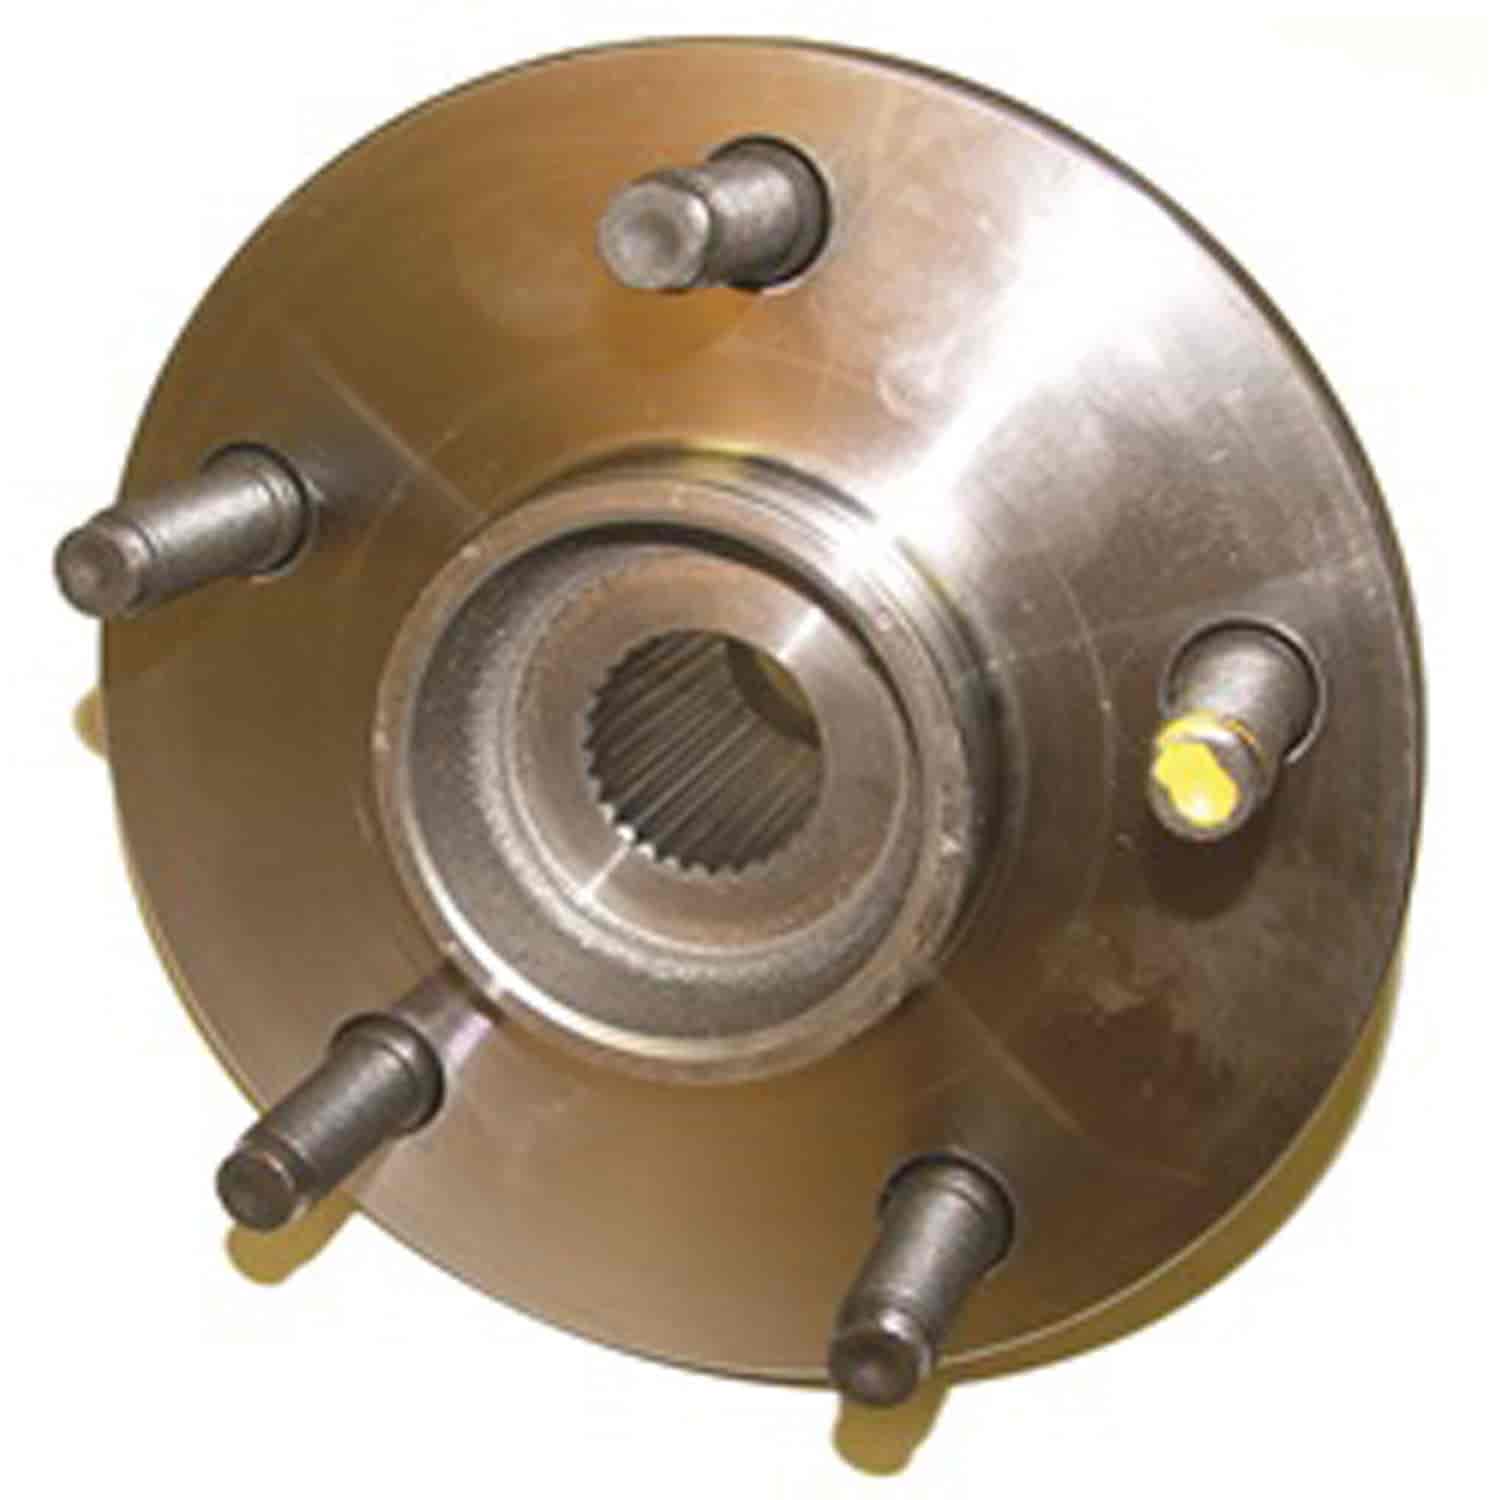 This front axle hub assembly from Omix-ADA fits 99-04 Jeep Grand Cherokee WJ . Fits left or right side.